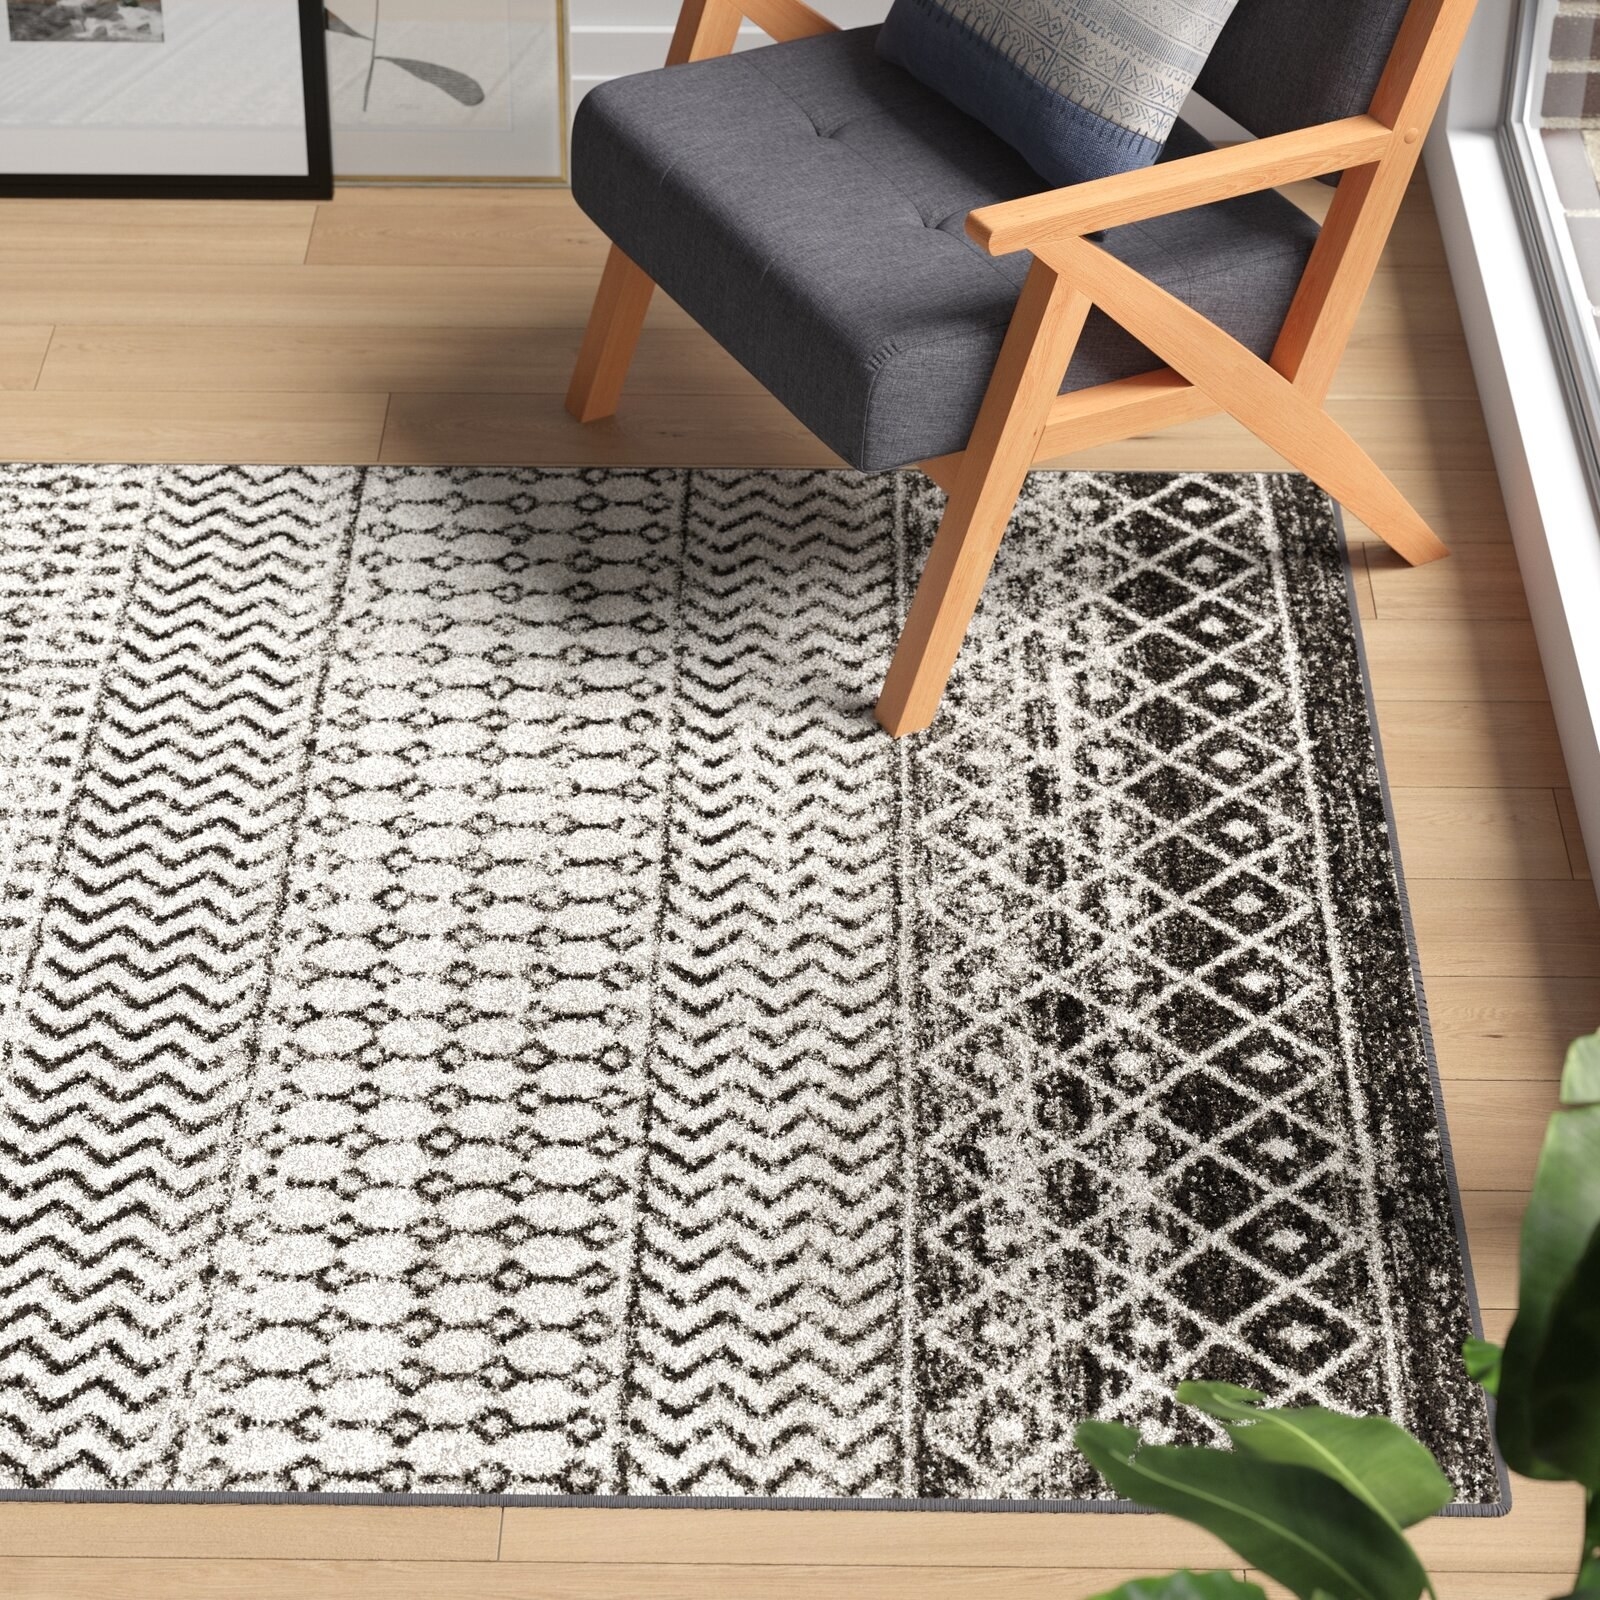 patterned area rug in a living space